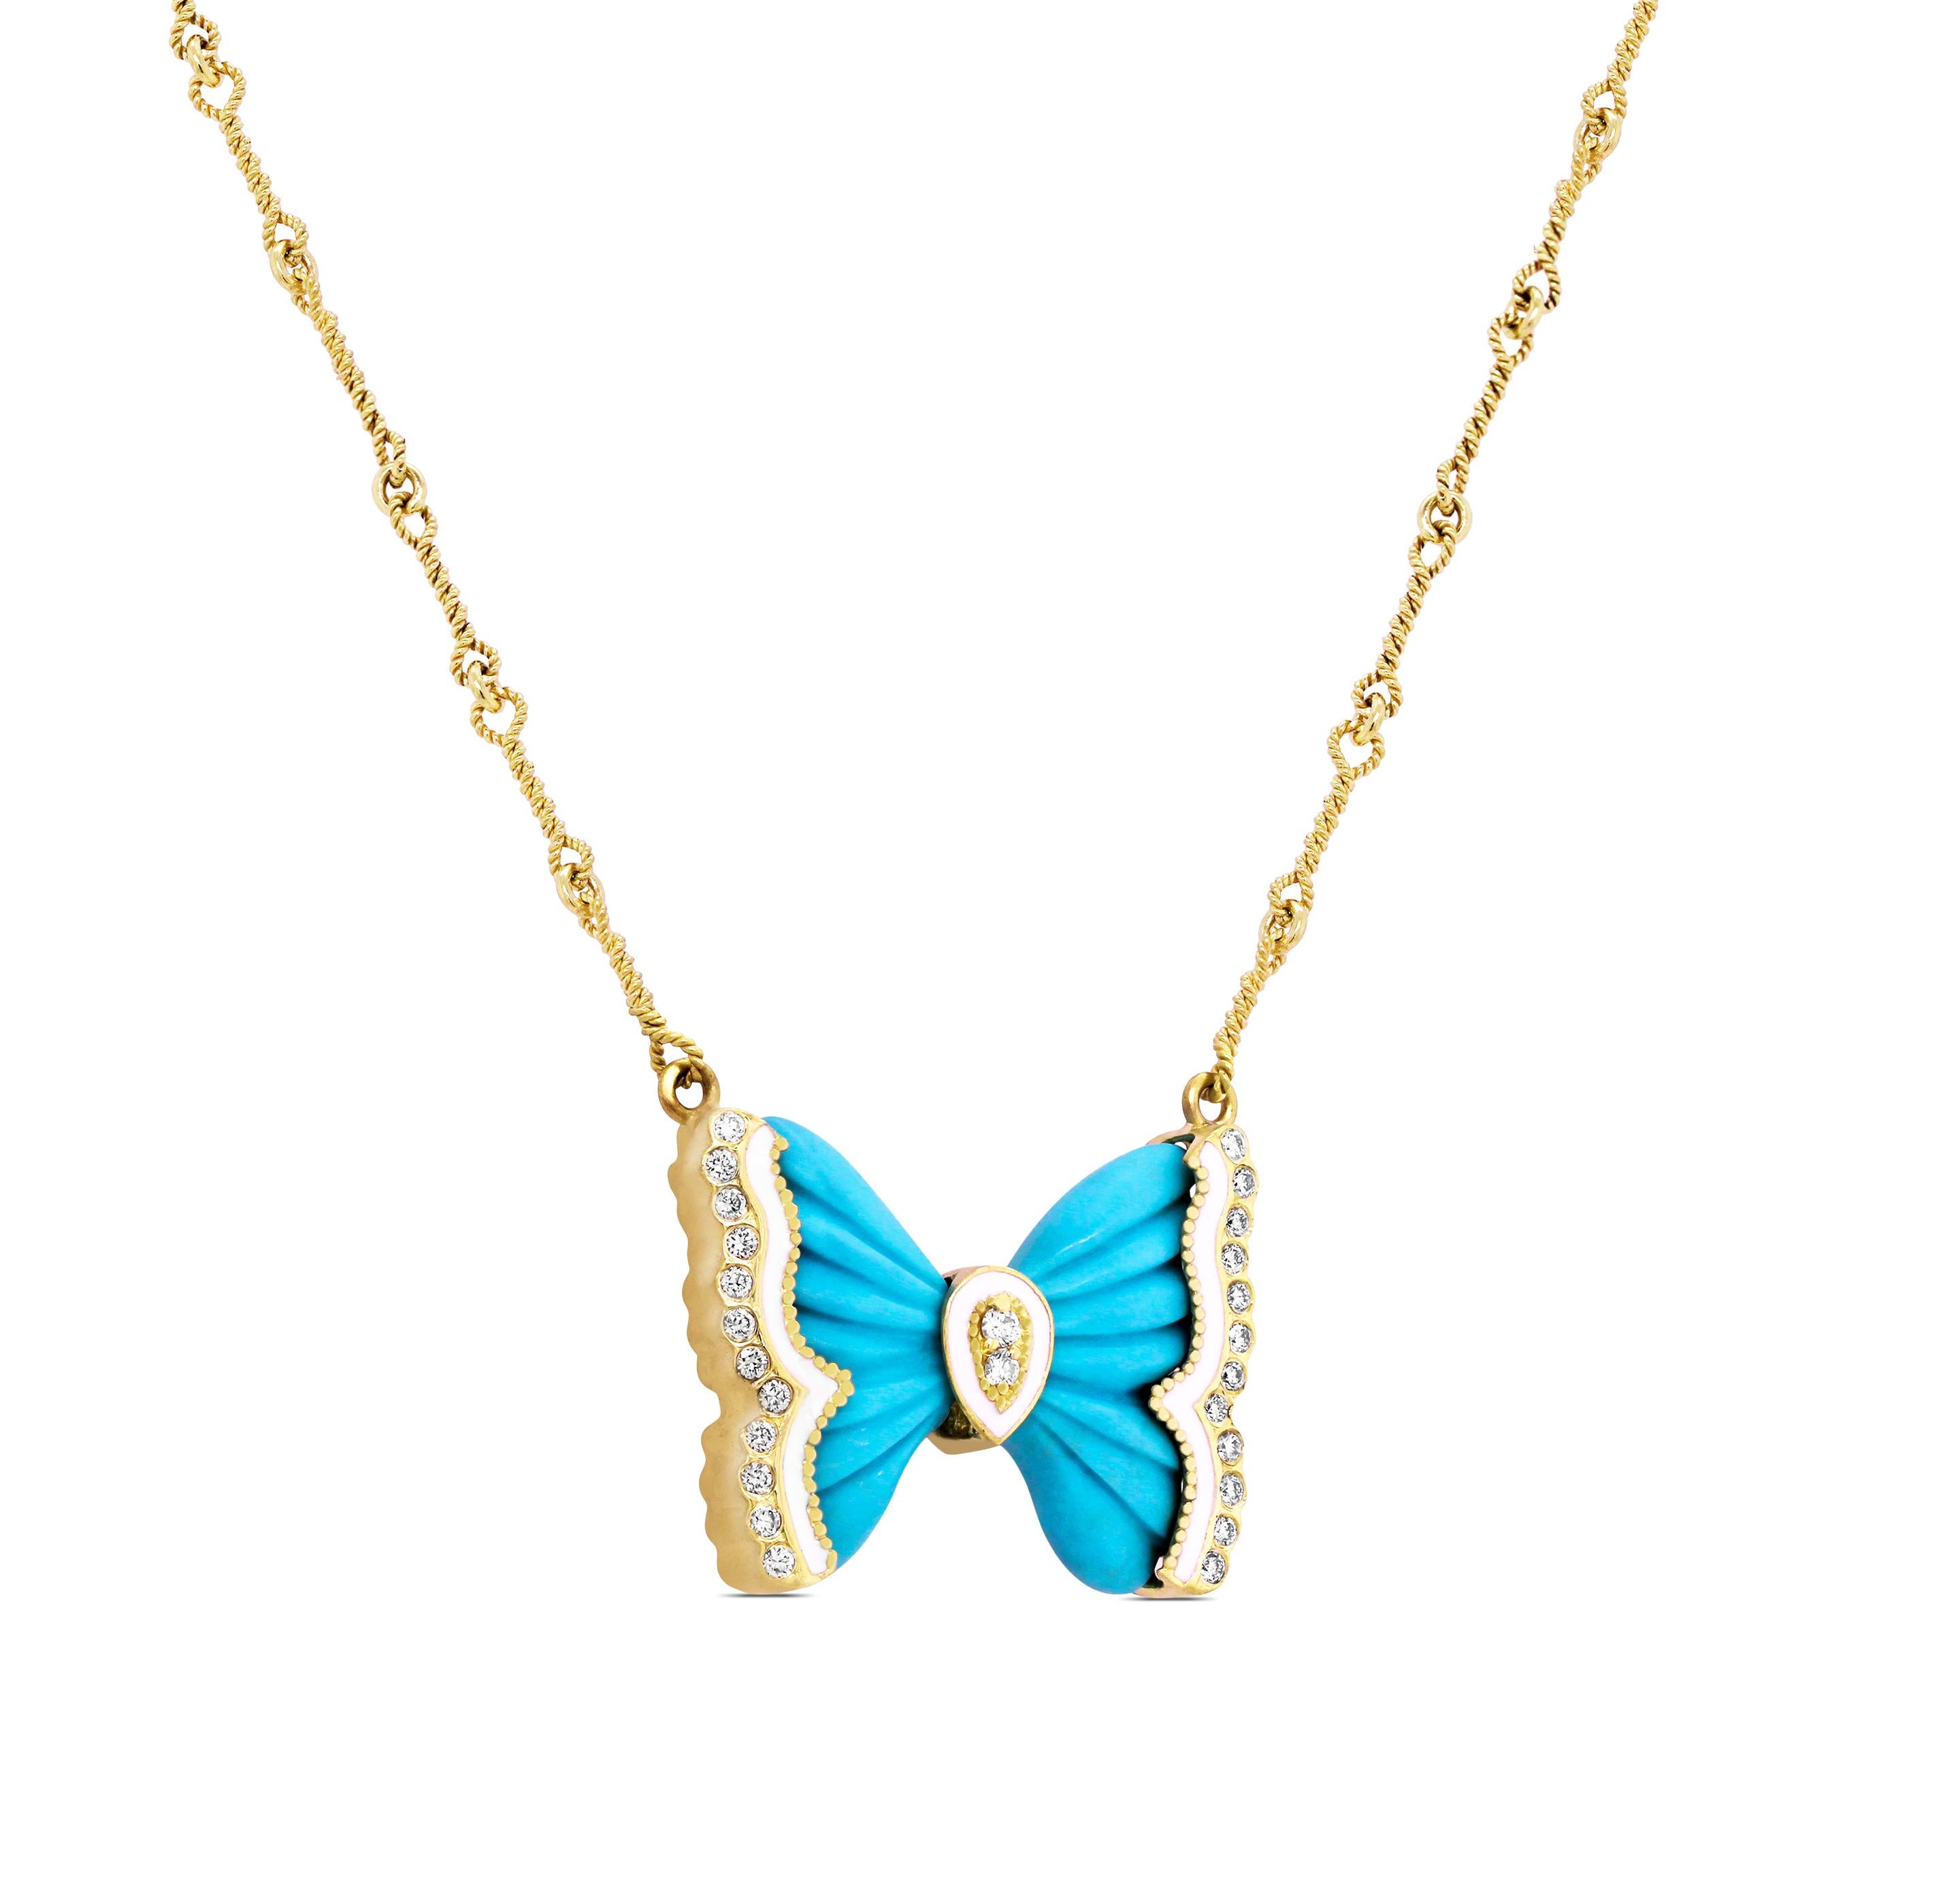 18K Yellow Gold and Diamond Butterfly Pendant Necklace with Turquoise and White Enamel by Stambolian

This butterfly is from the 2020 Spring Stambolian collection and features two special cut Turquoise framed with white enamel and diamonds

Apprx.